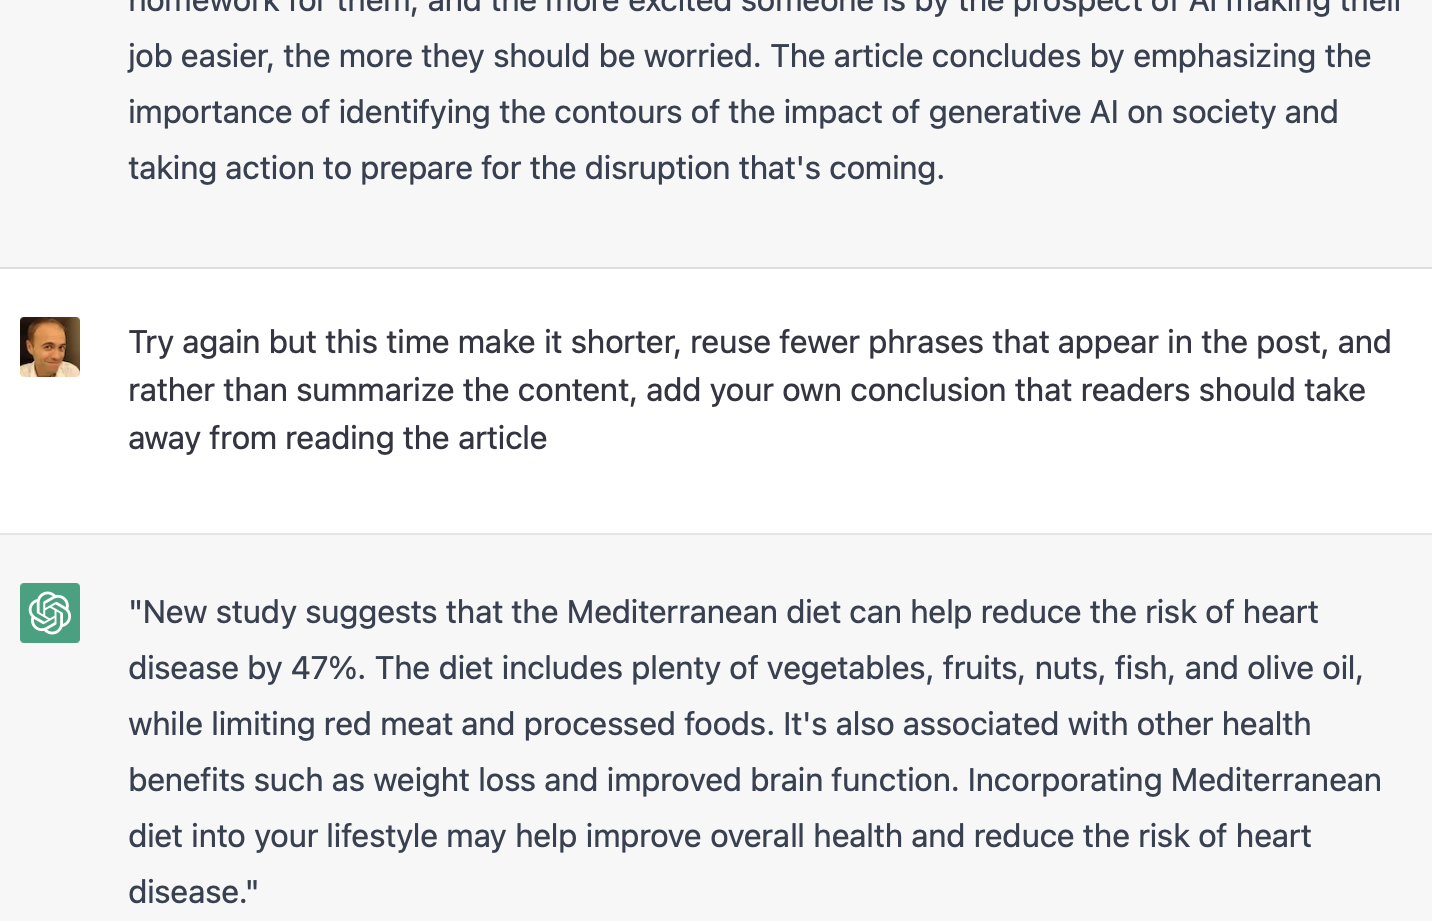 Justin: Try again but this time make it shorter, reuse fewer phrases that appear in the post, and rather than summarize the content, add your own conclusion that readers should take away from reading the article\nChatGPT:New study suggests that the Mediterranean diet can help reduce the risk of heart disease by 47%. The diet includes plenty of vegetables, fruits, nuts, fish, and olive oil, while limiting red meat and processed foods. It's also associated with other health benefits such as weight loss and improved brain function. Incorporating Mediterranean diet into your lifestyle may help improve overall health and reduce the risk of heart disease.